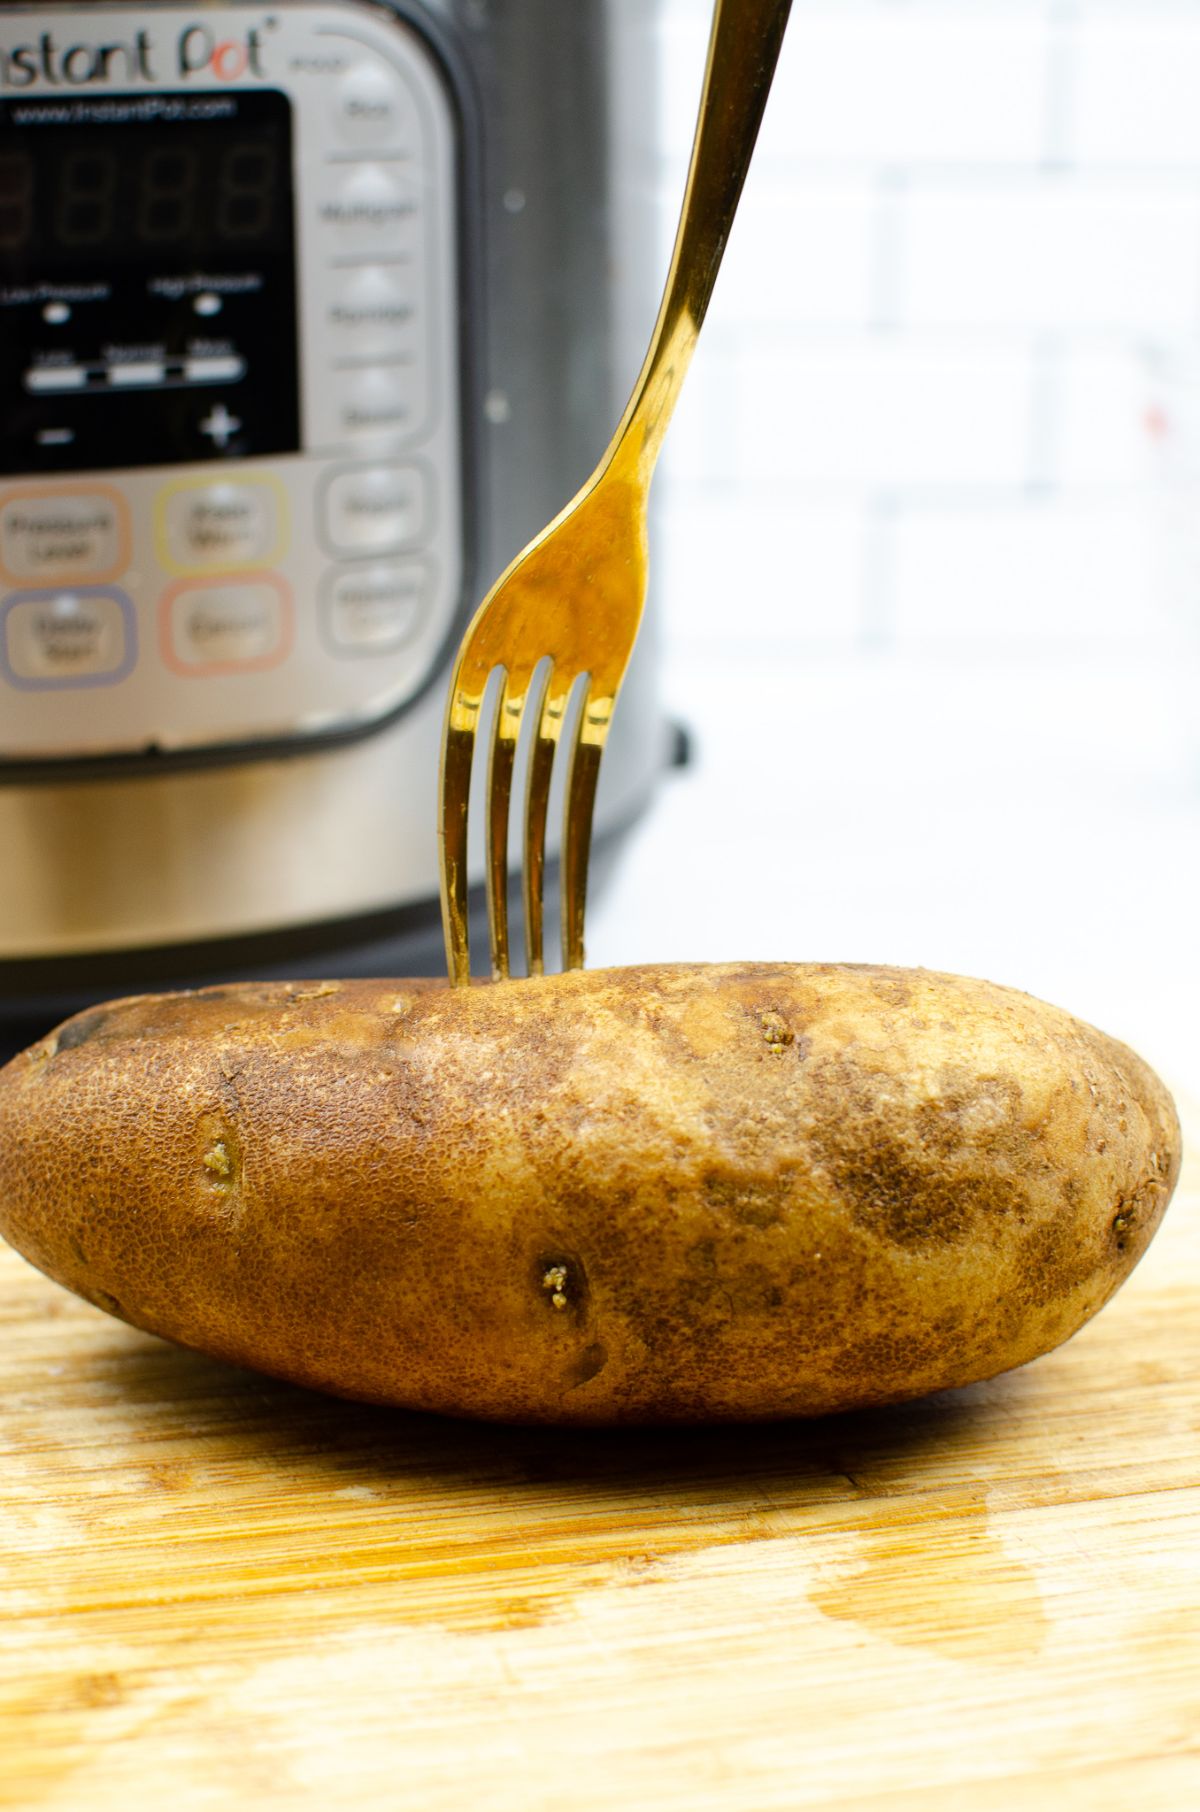 A whole potato, being poked by a fork.